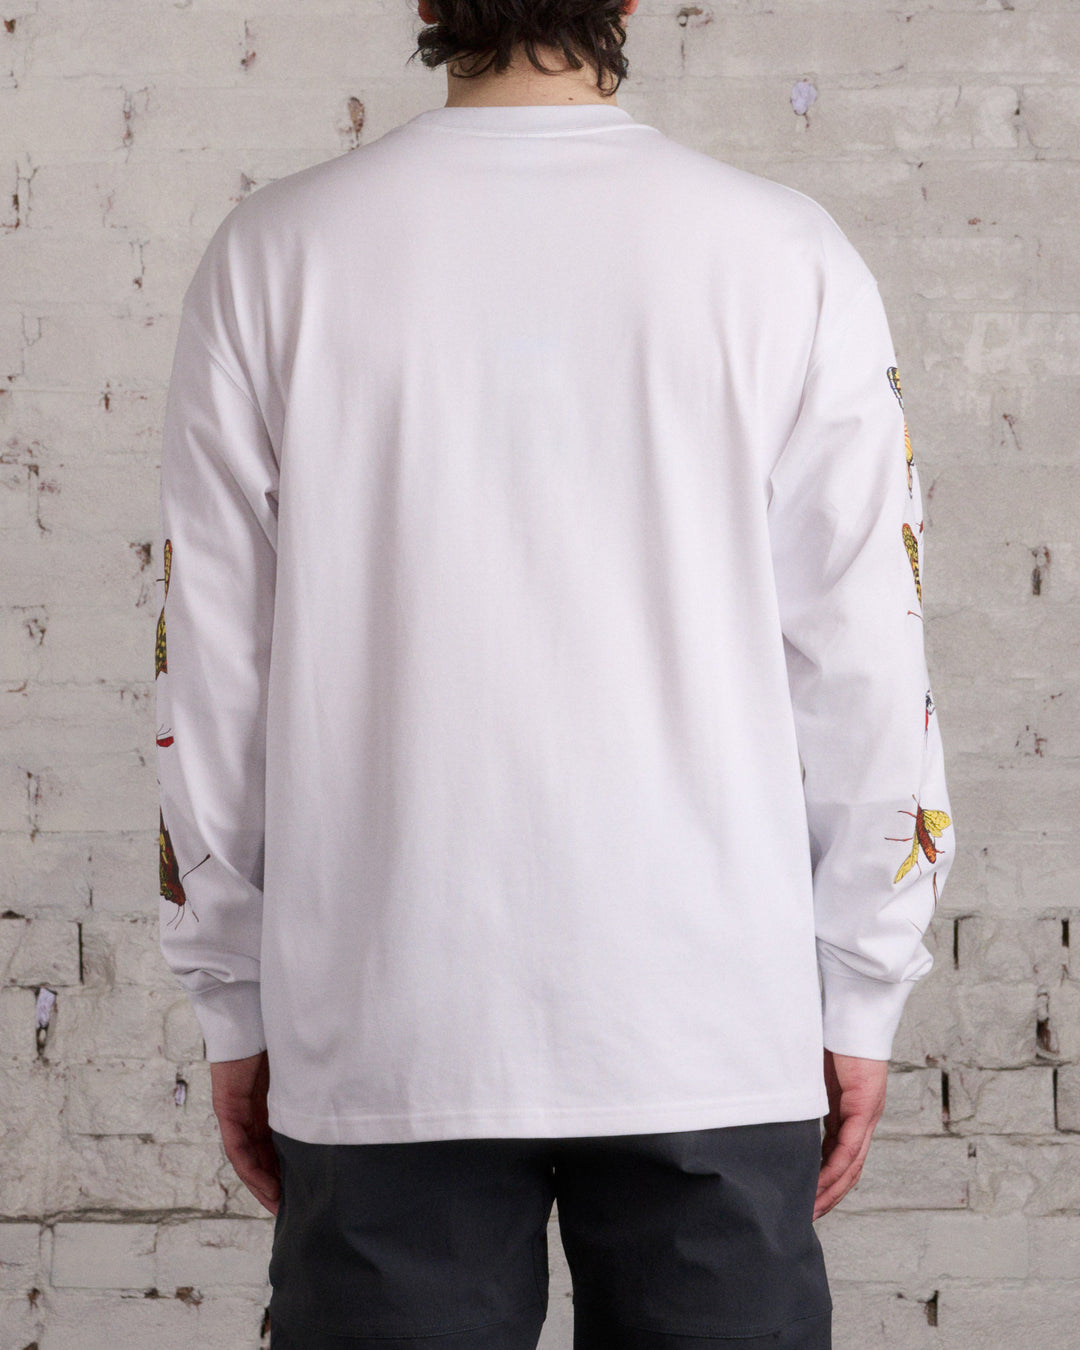 Nike ACG "Insects" Long Sleeve T-Shirt Summit White